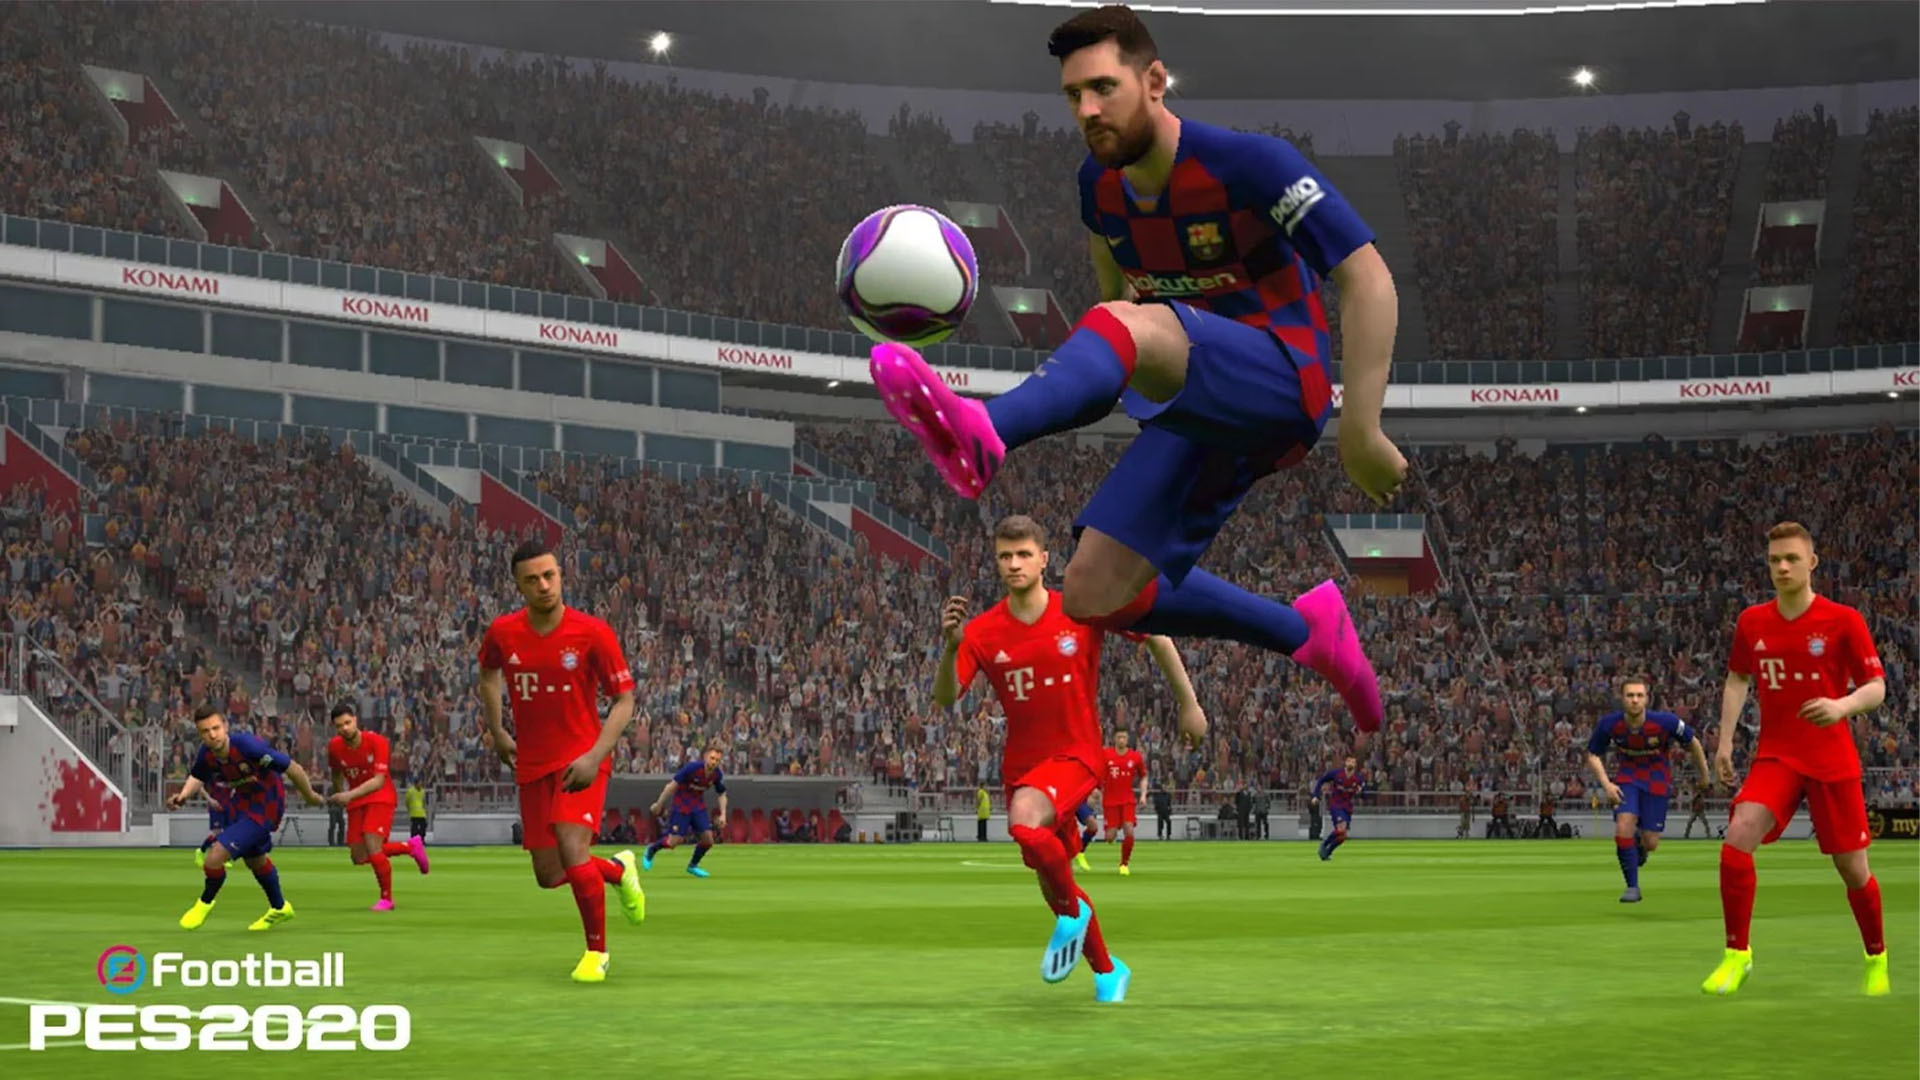 10 best soccer games and European football games for Android